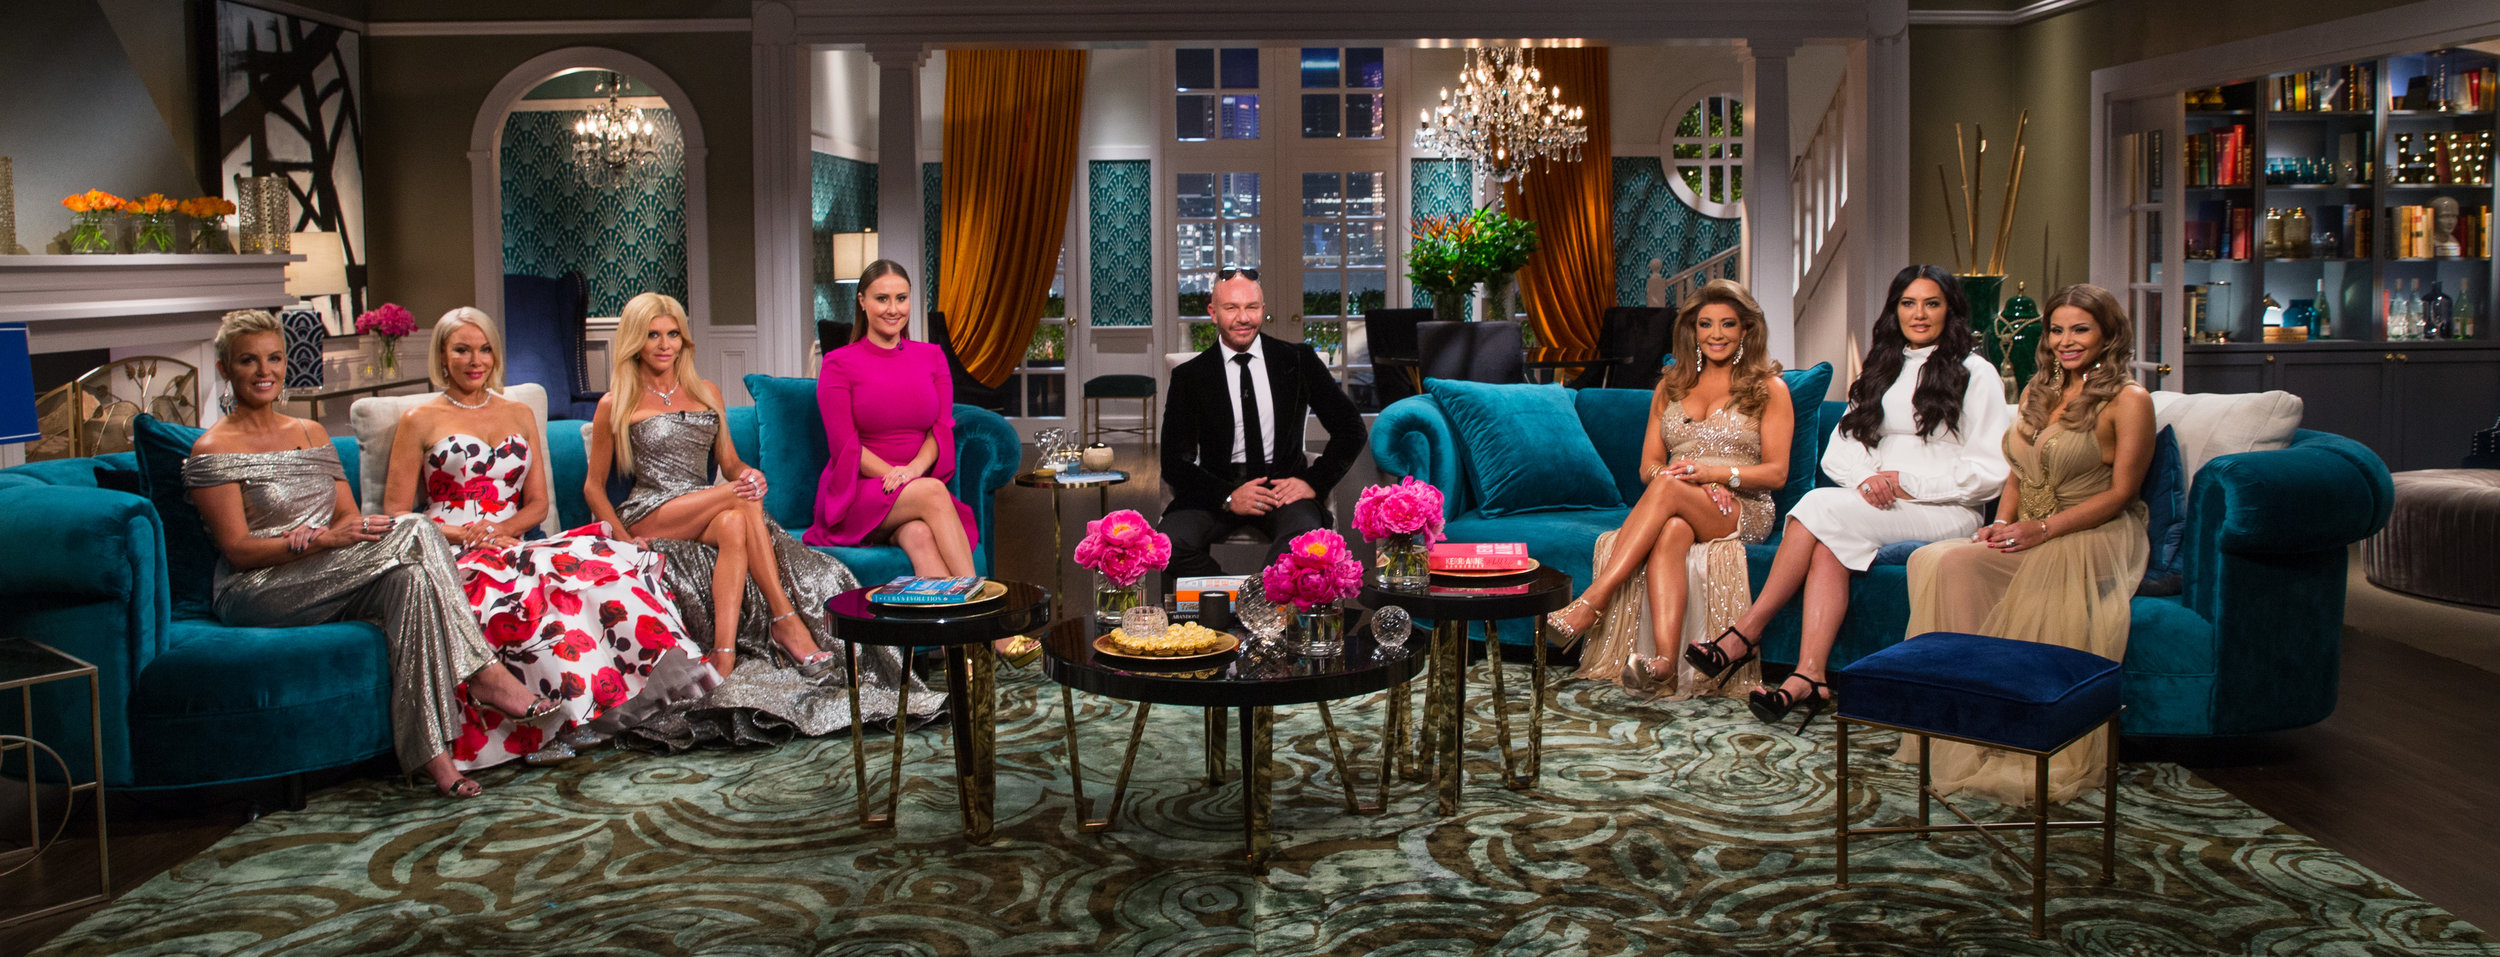   The Real Housewives of Melbourne S04 Reunion  Image - Arena 